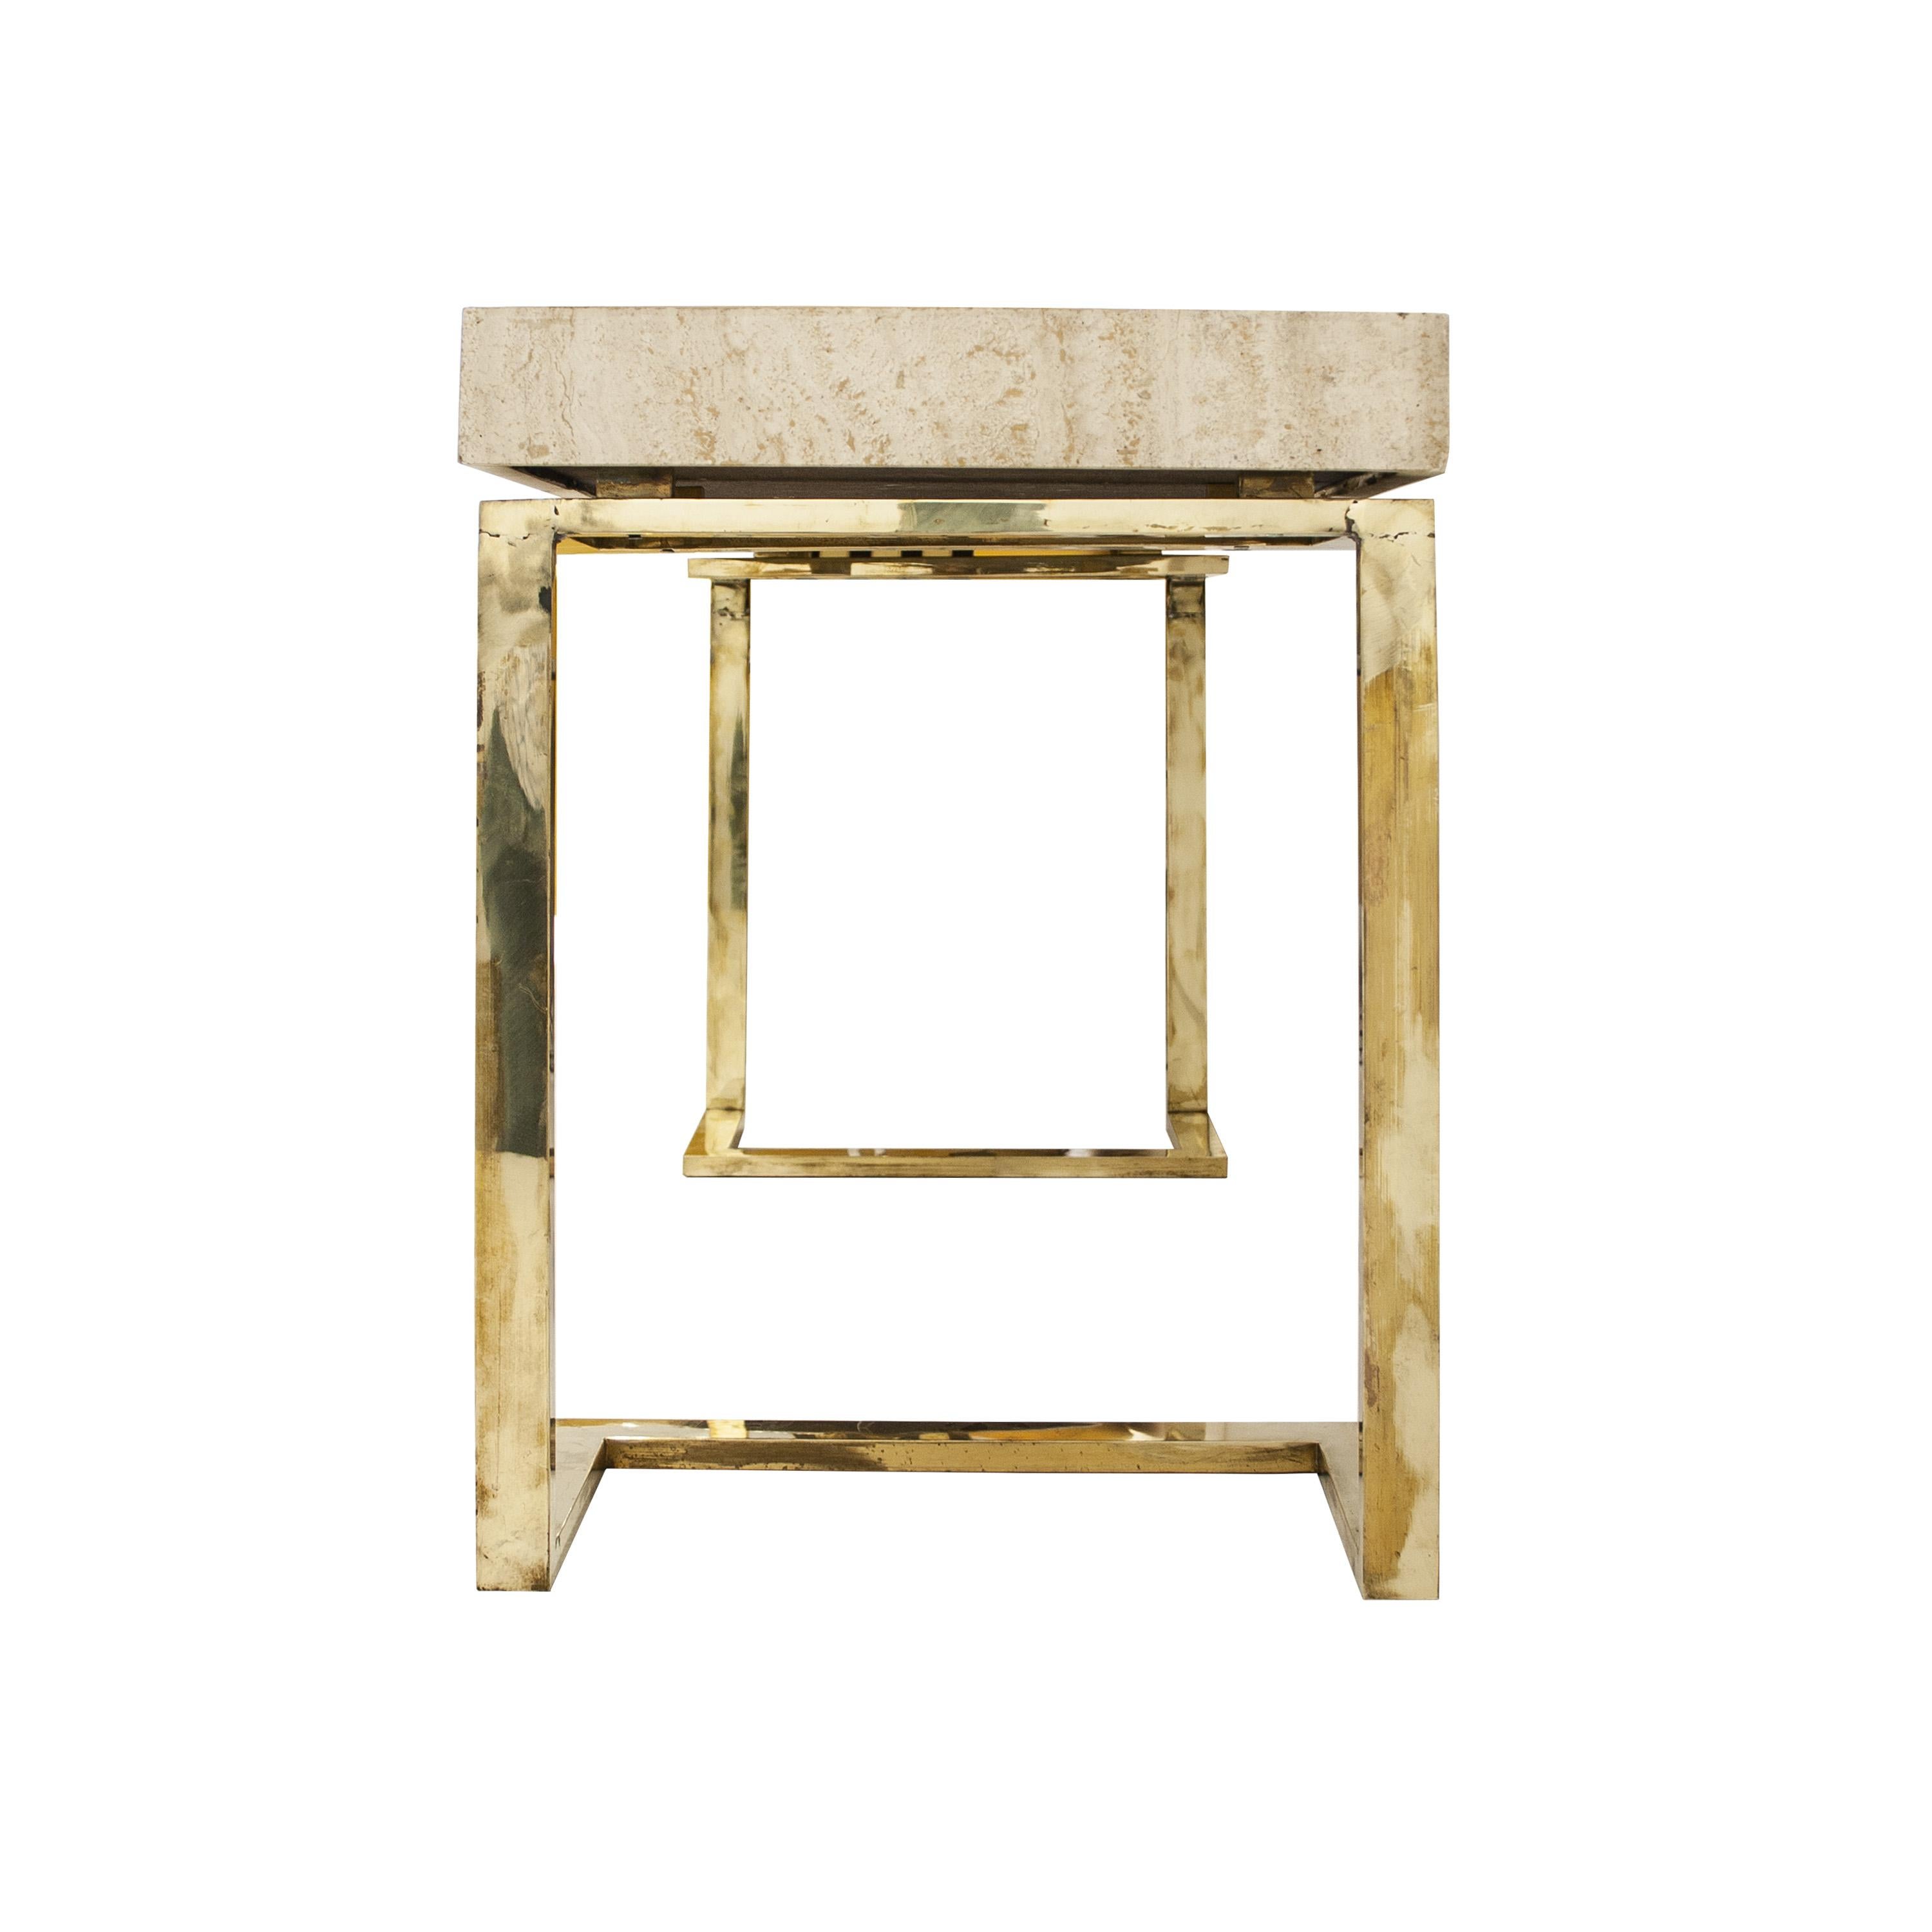 Italian Modern Console Table with Travertine Top and Brass Chromed Base, 1970, Italia For Sale